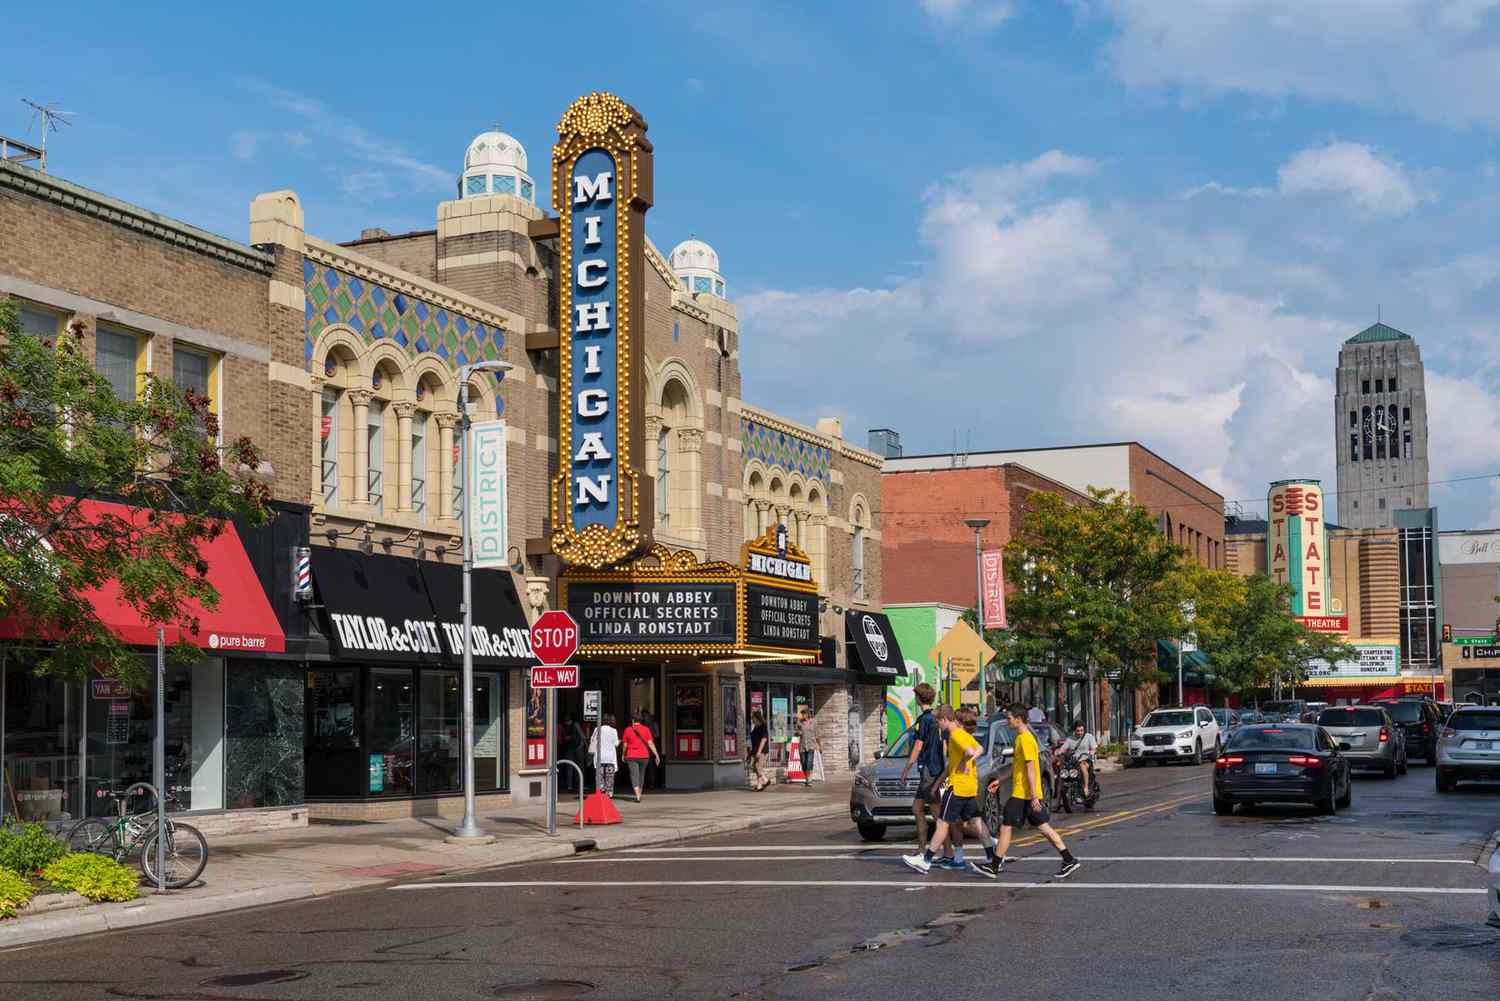 Cities in Michigan tourists should avoid. (Photo: Travel + Leisure)